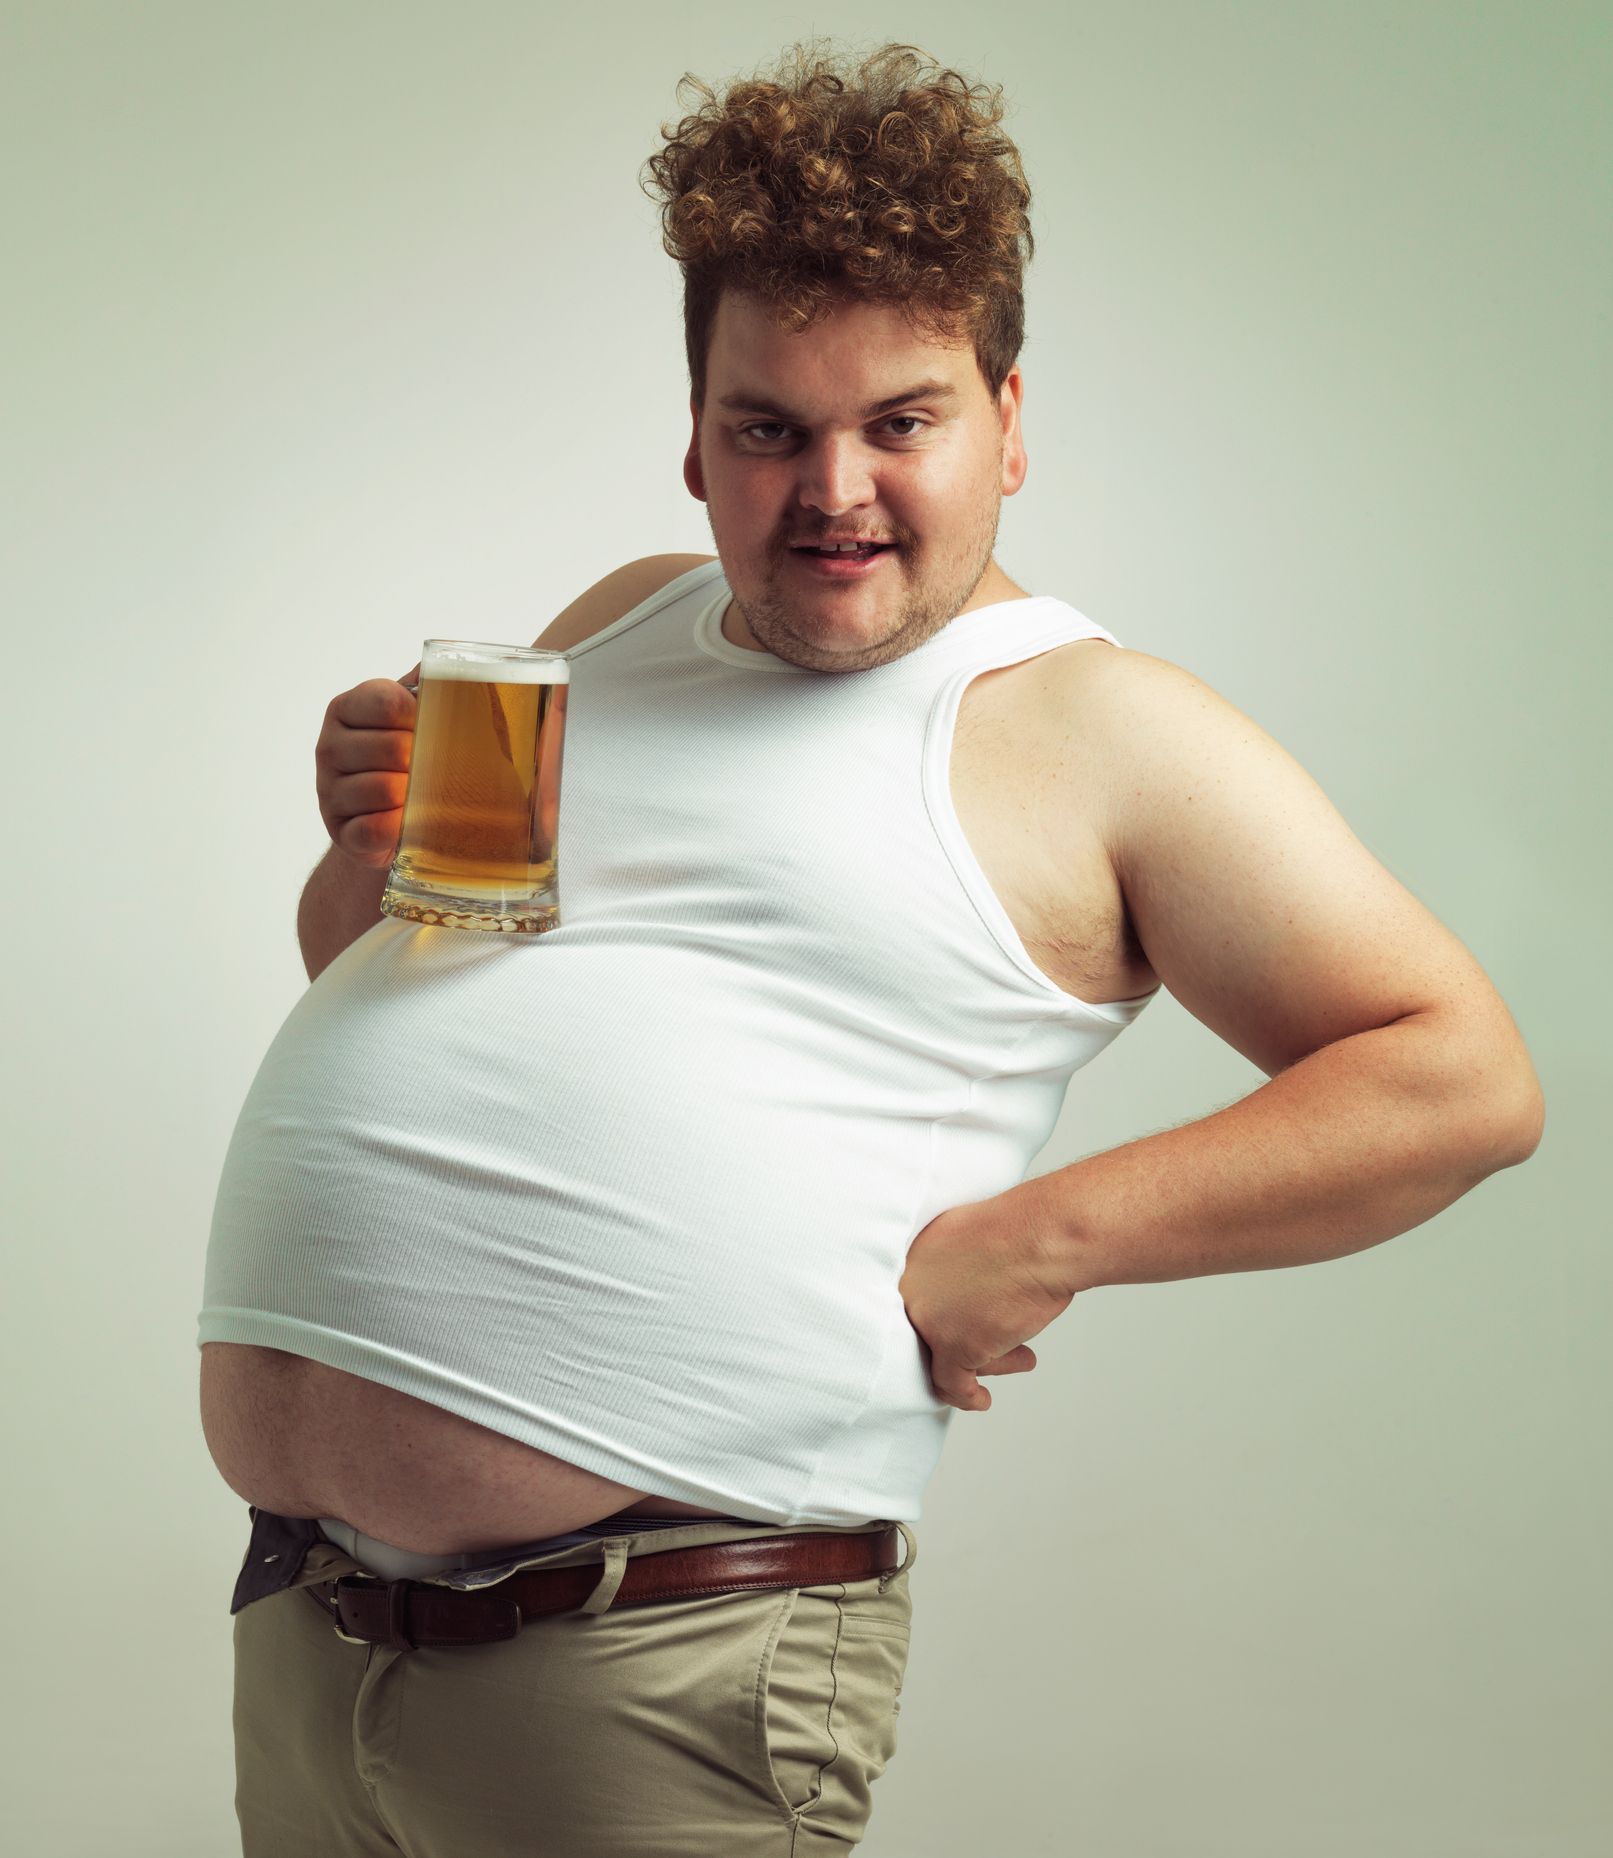 2. Beer May Prevent Fat Burning